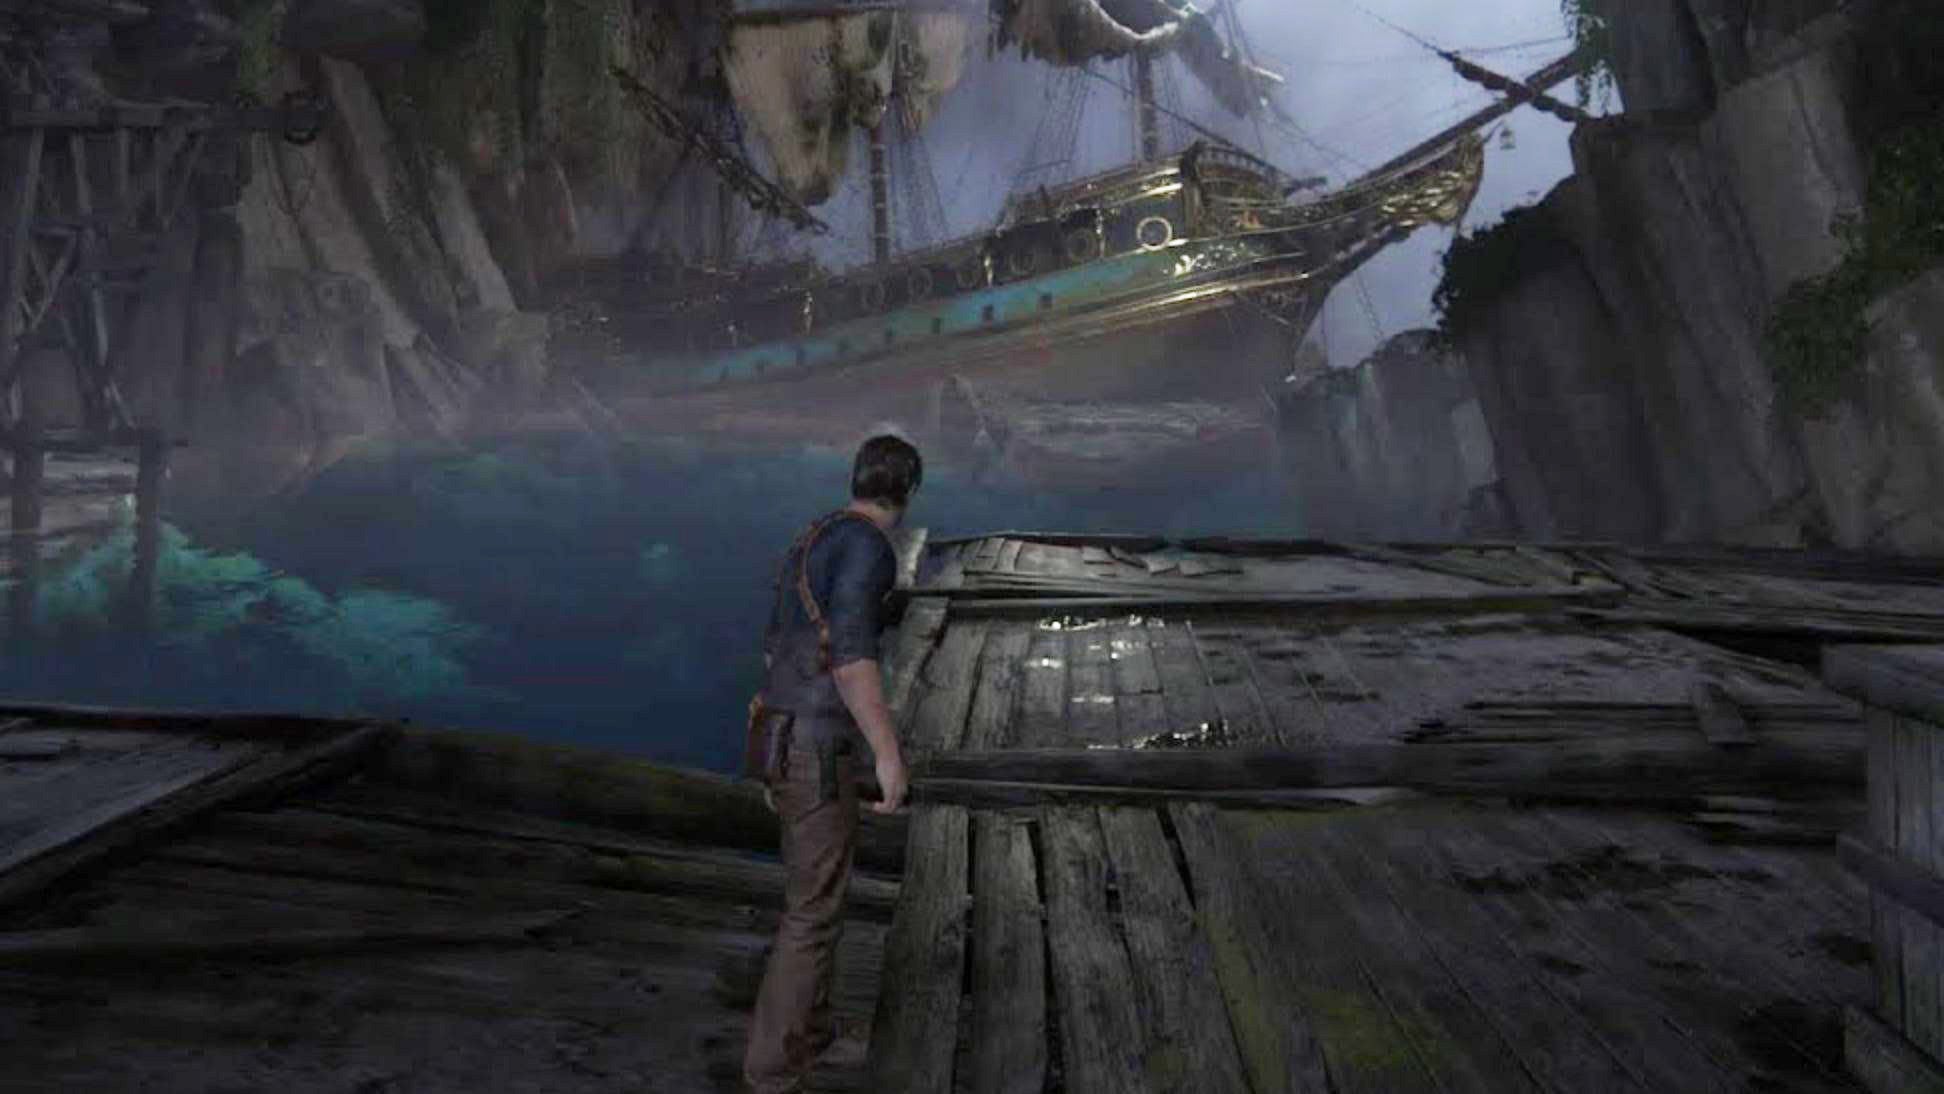 6 shooting locations of the movie Uncharted - Fantrippers